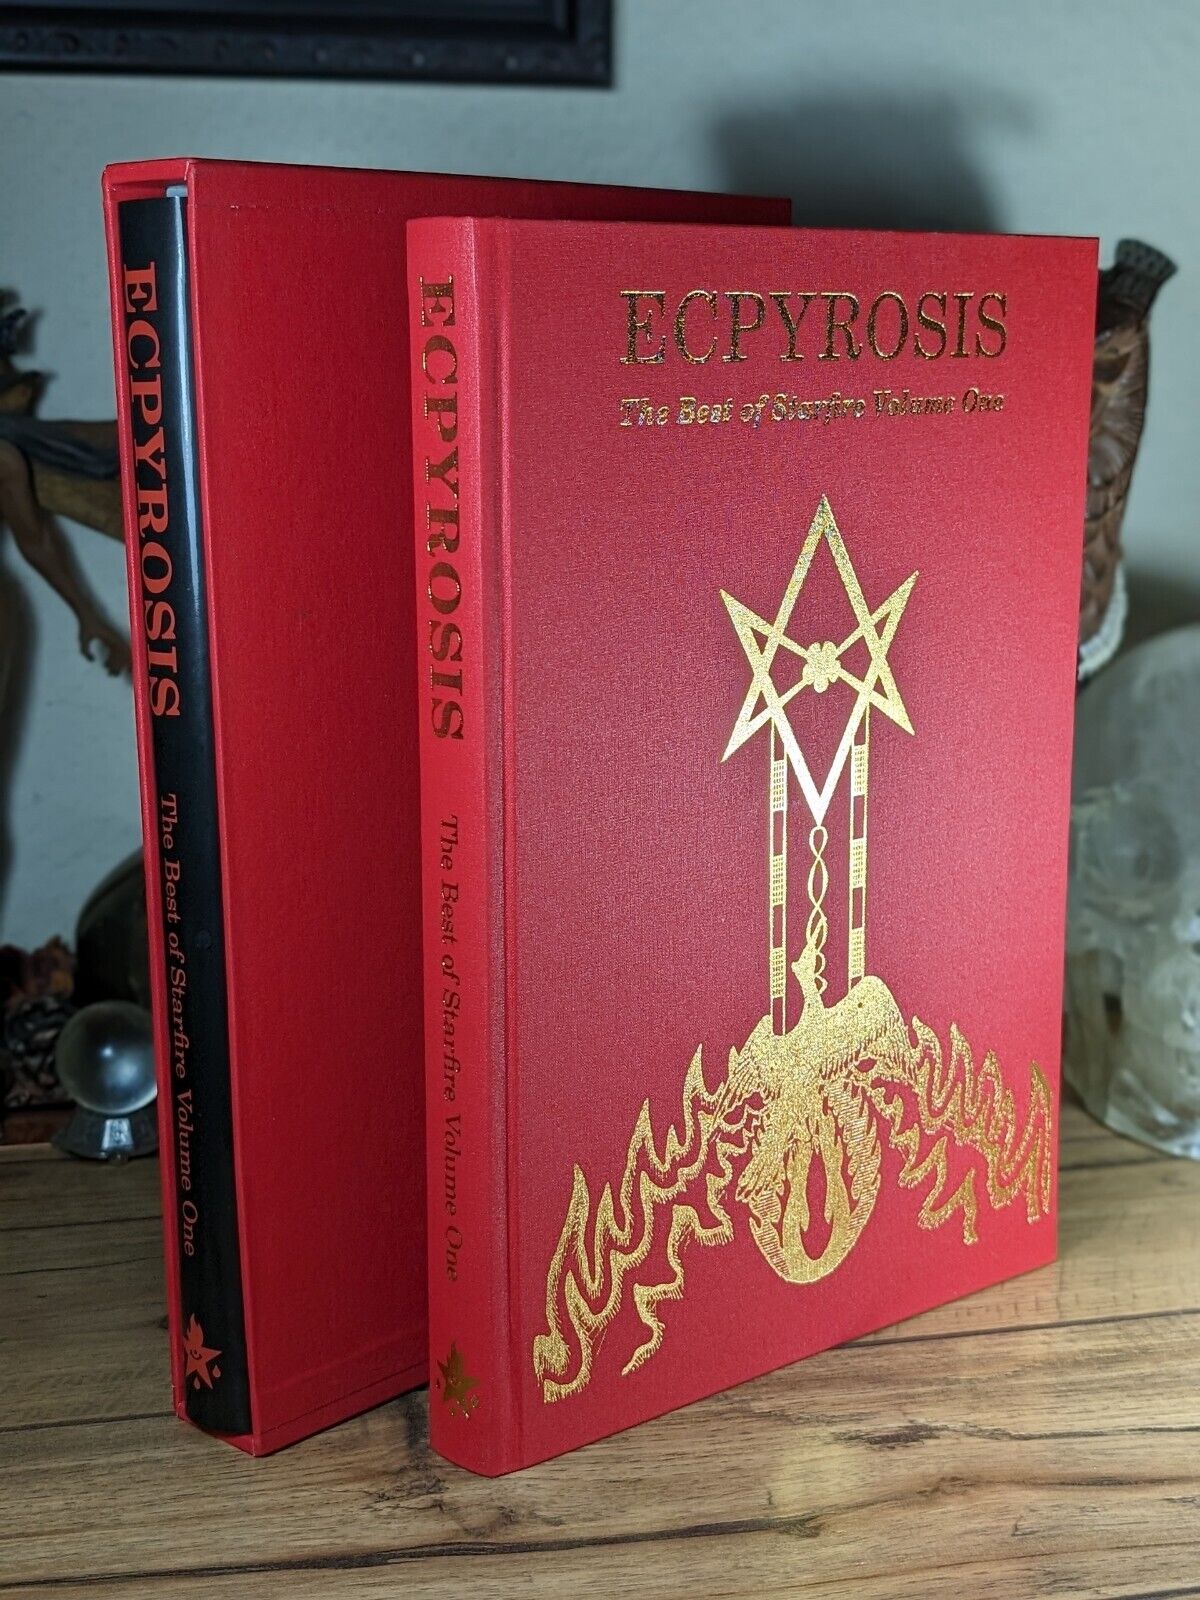 ECPYROSIS - Rare Occult - Deluxe Ed - No. 111 of 111 - STARFIRE - KENNETH GRANT